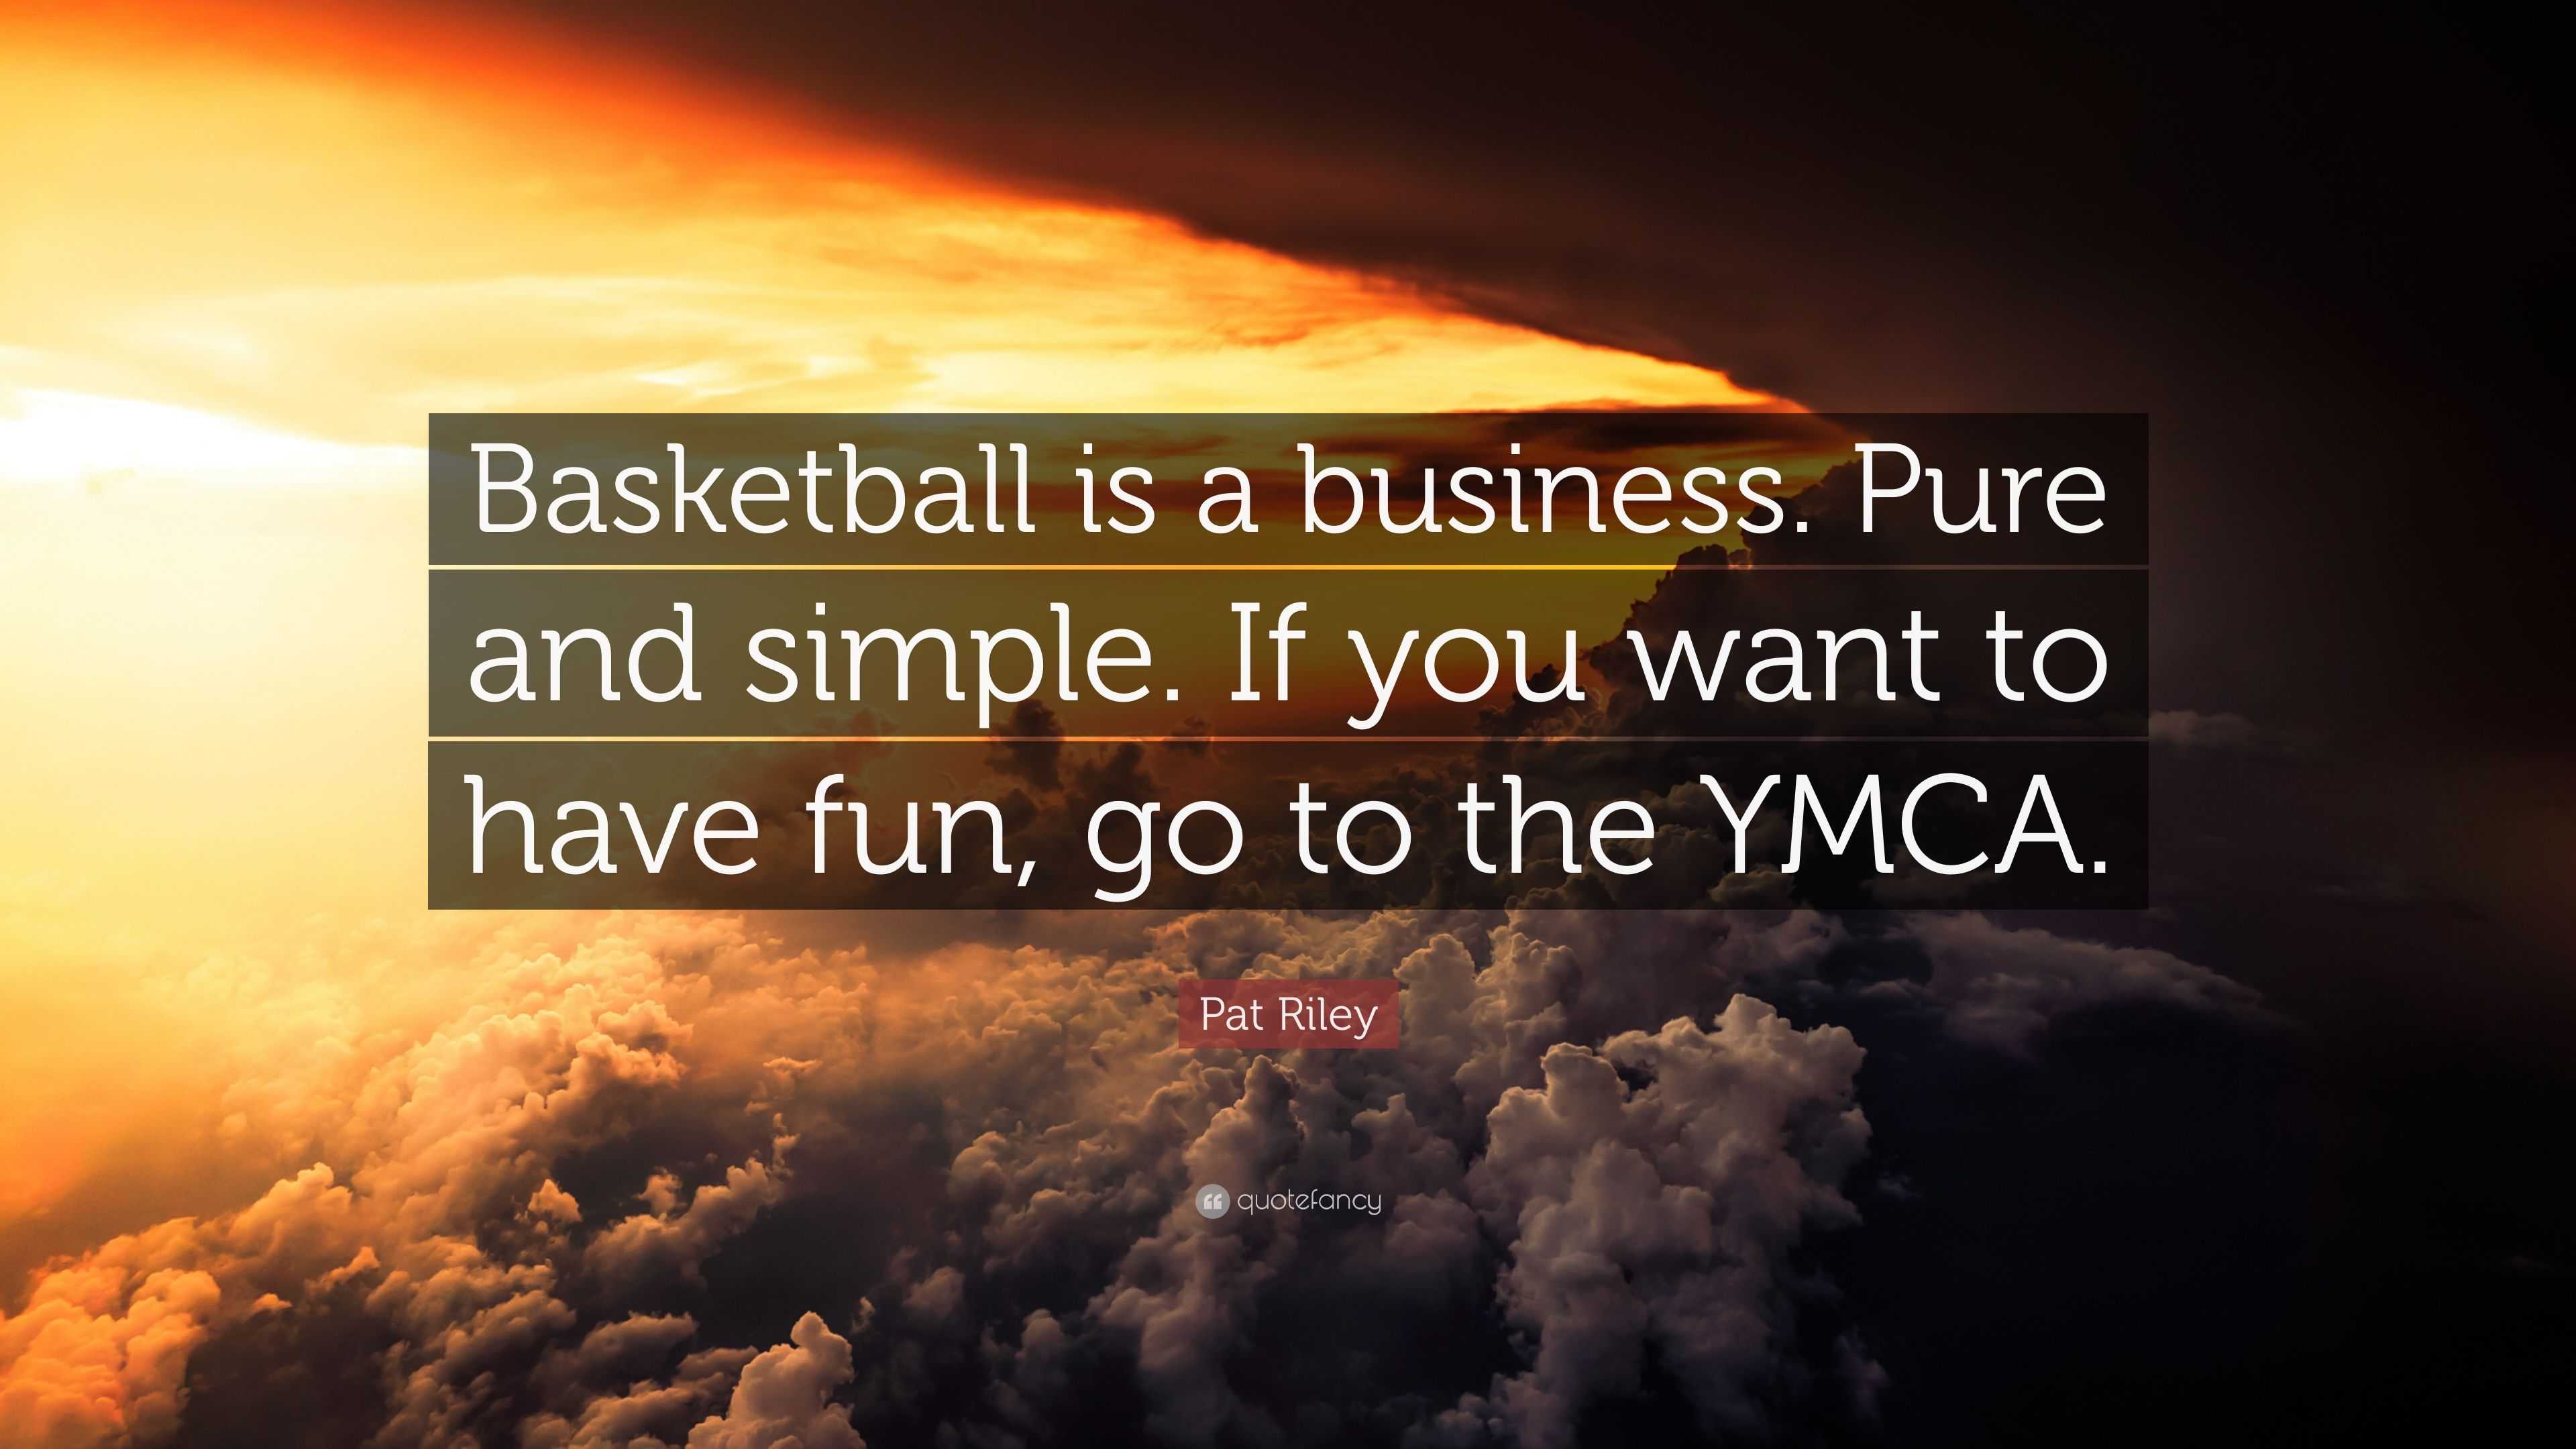 Pat Riley Quote: “Basketball is a business. Pure and simple. If you ...